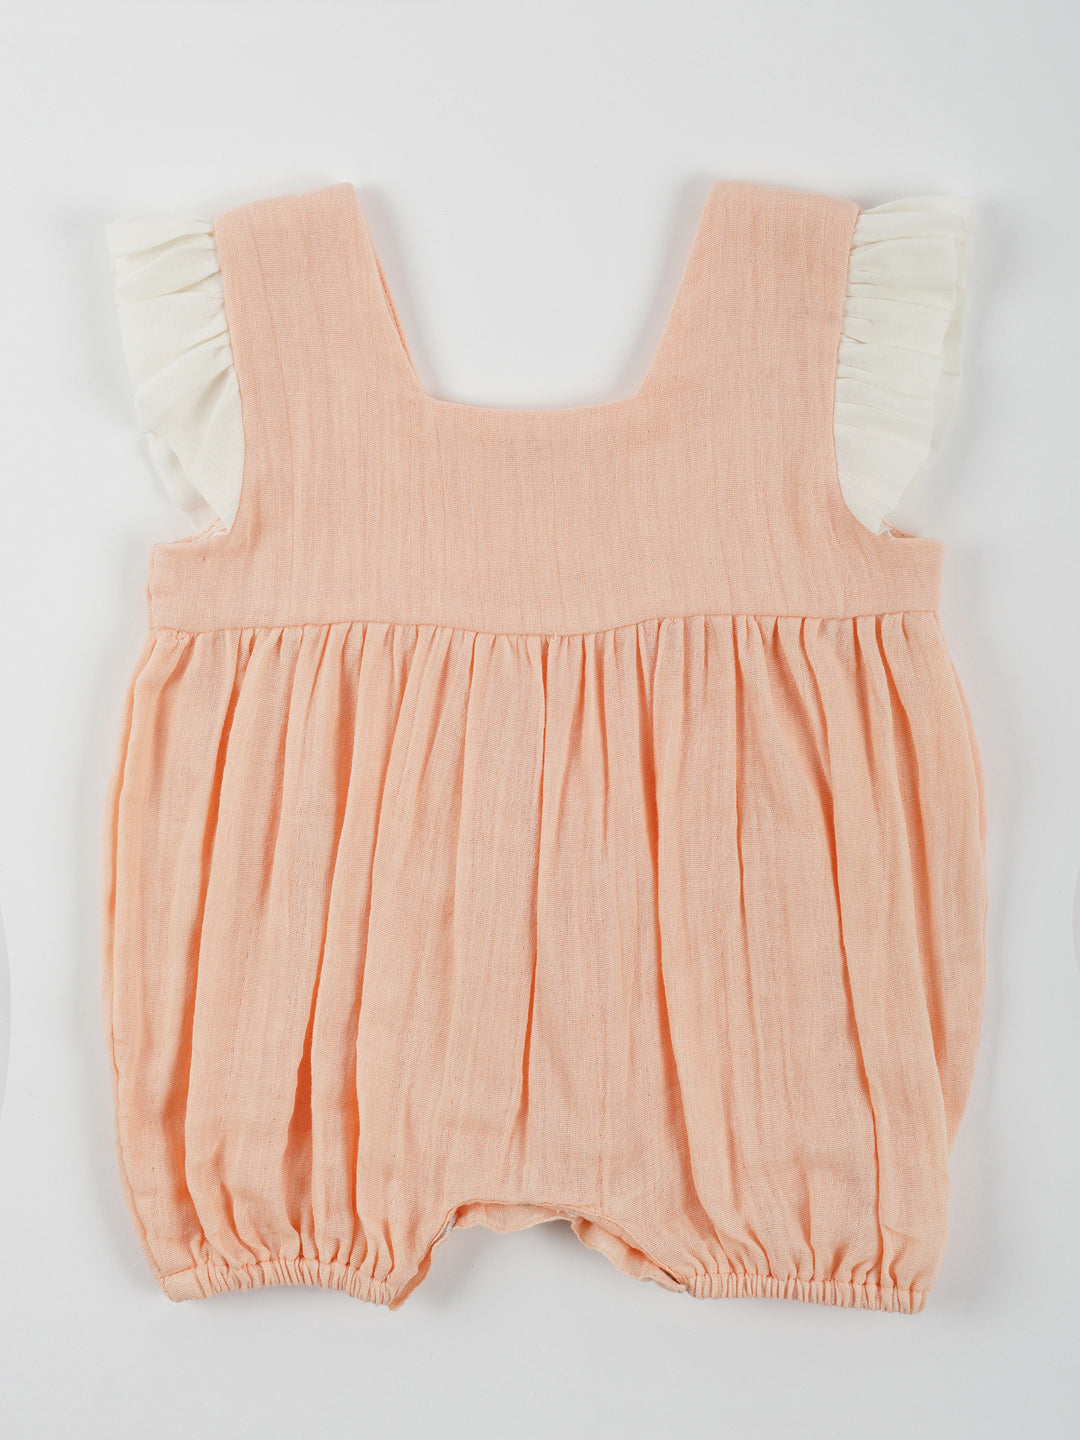 Double Cotton Pink Frill Onesie